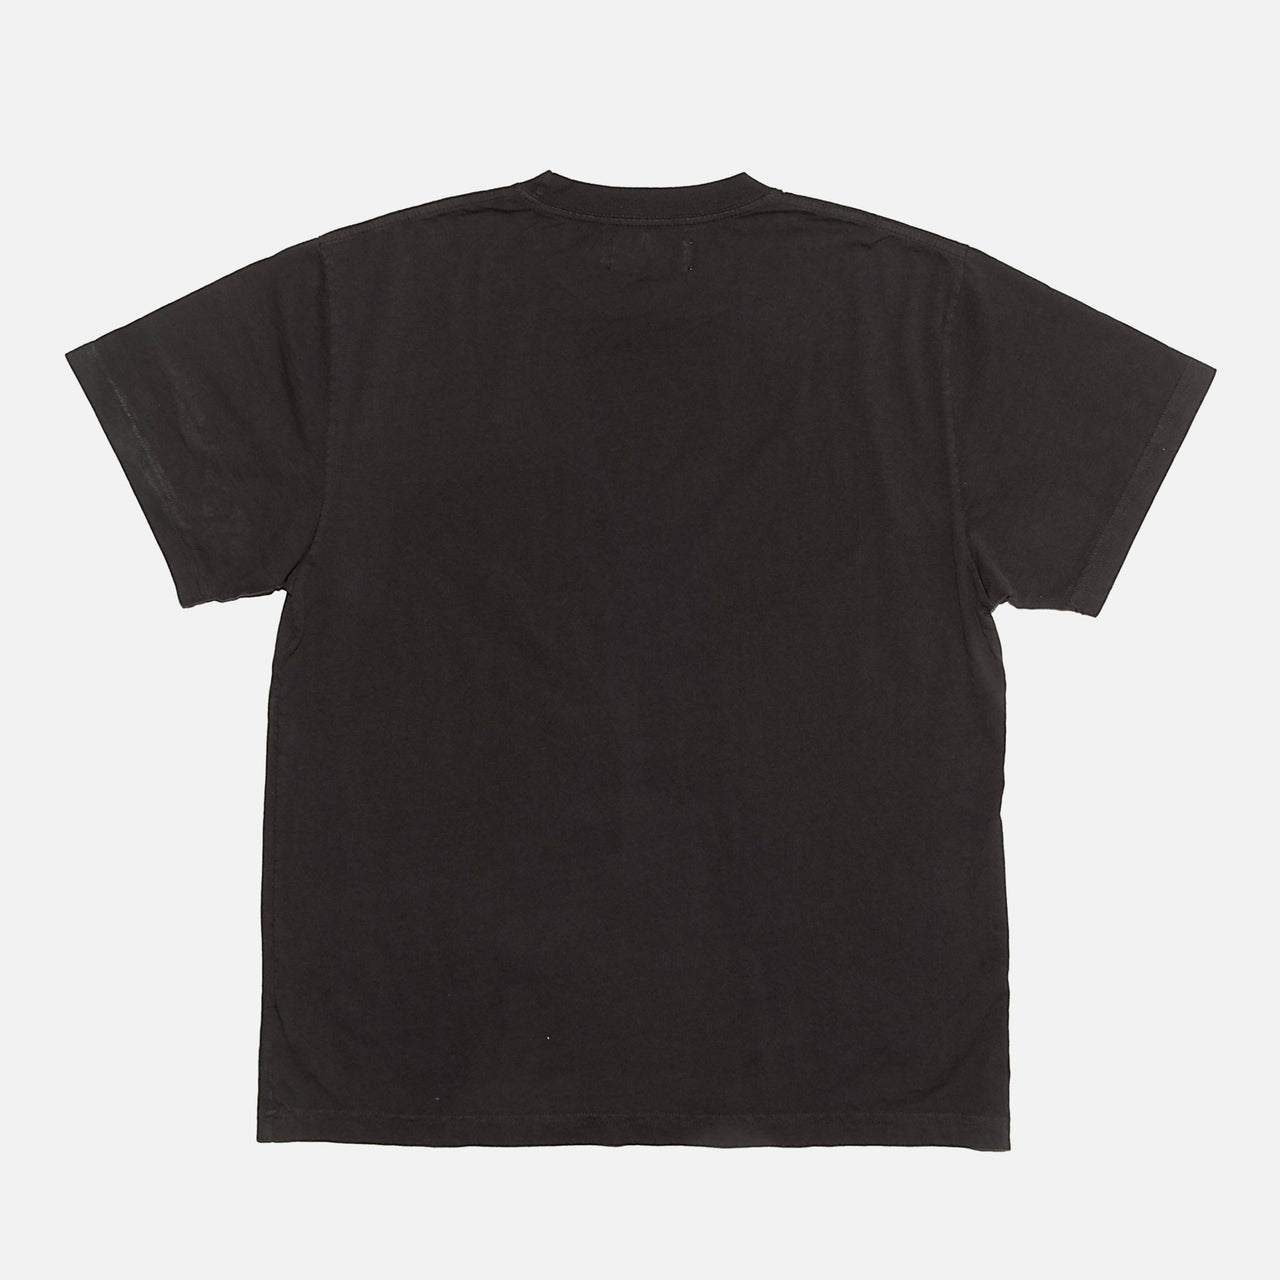 Apocalyptic Mountaineering T-Shirt - Washed Black